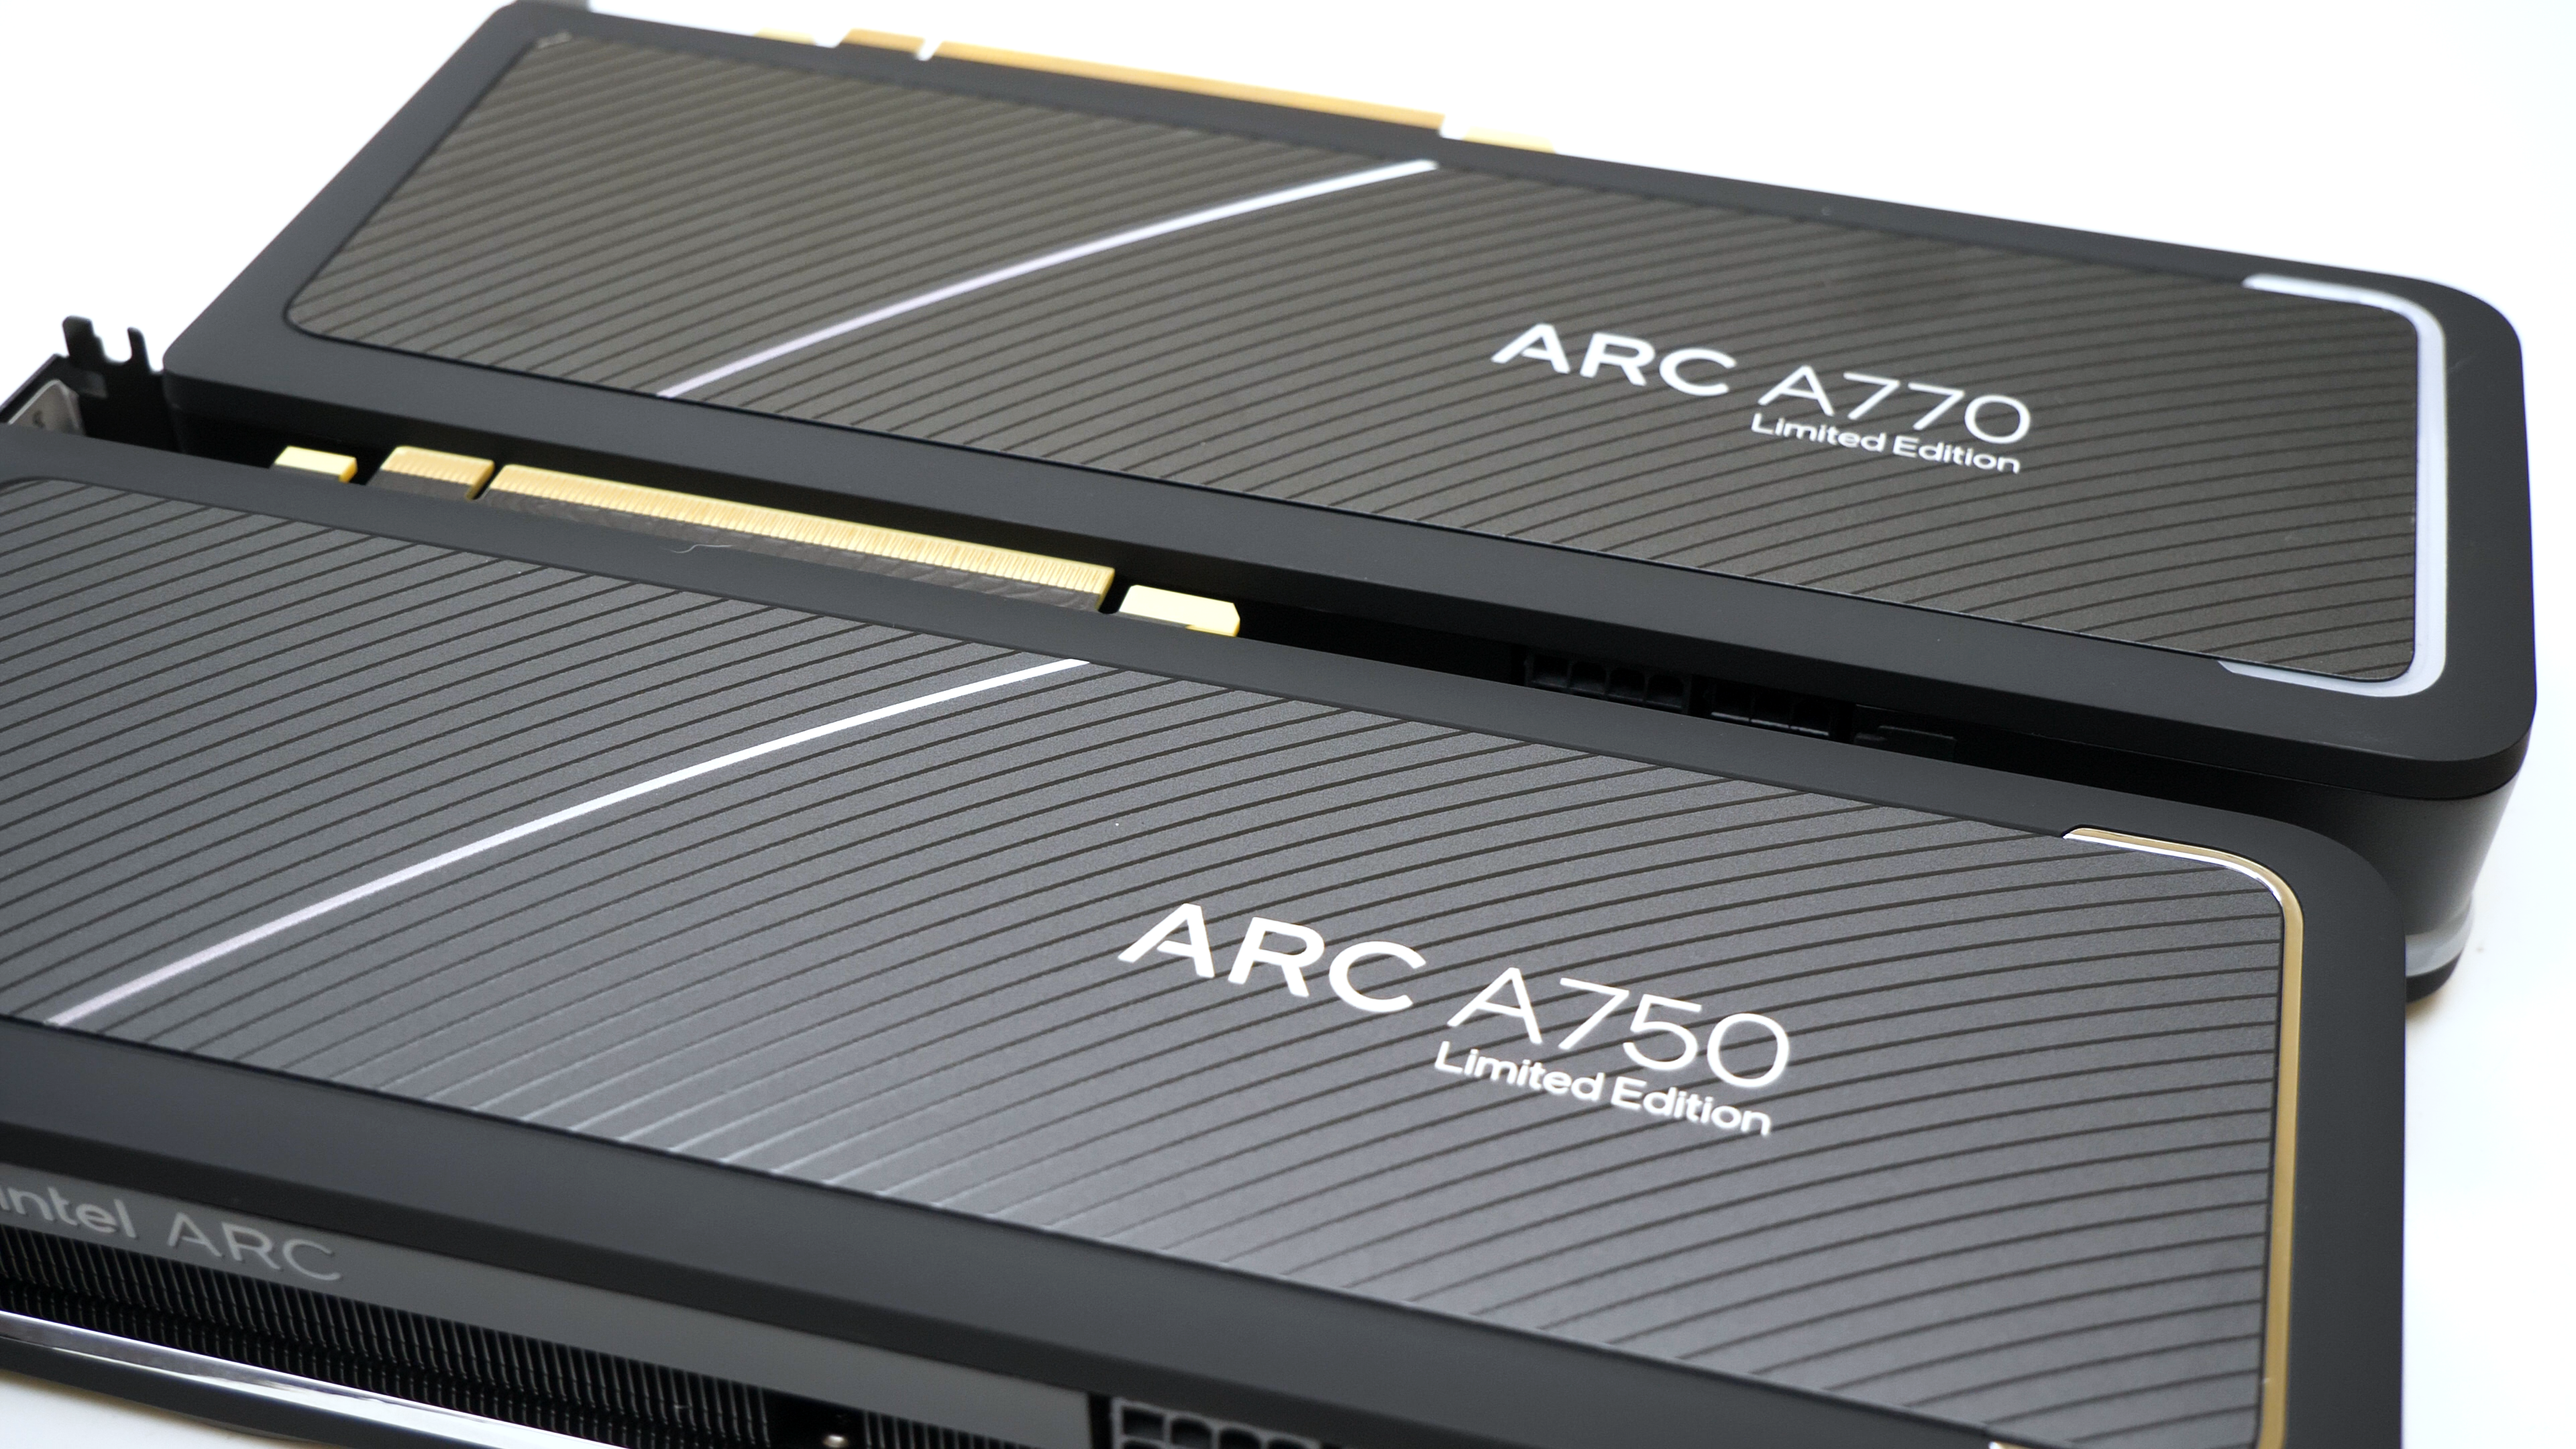 intel arc a770 and a750 hardware, showing the two graphics cards